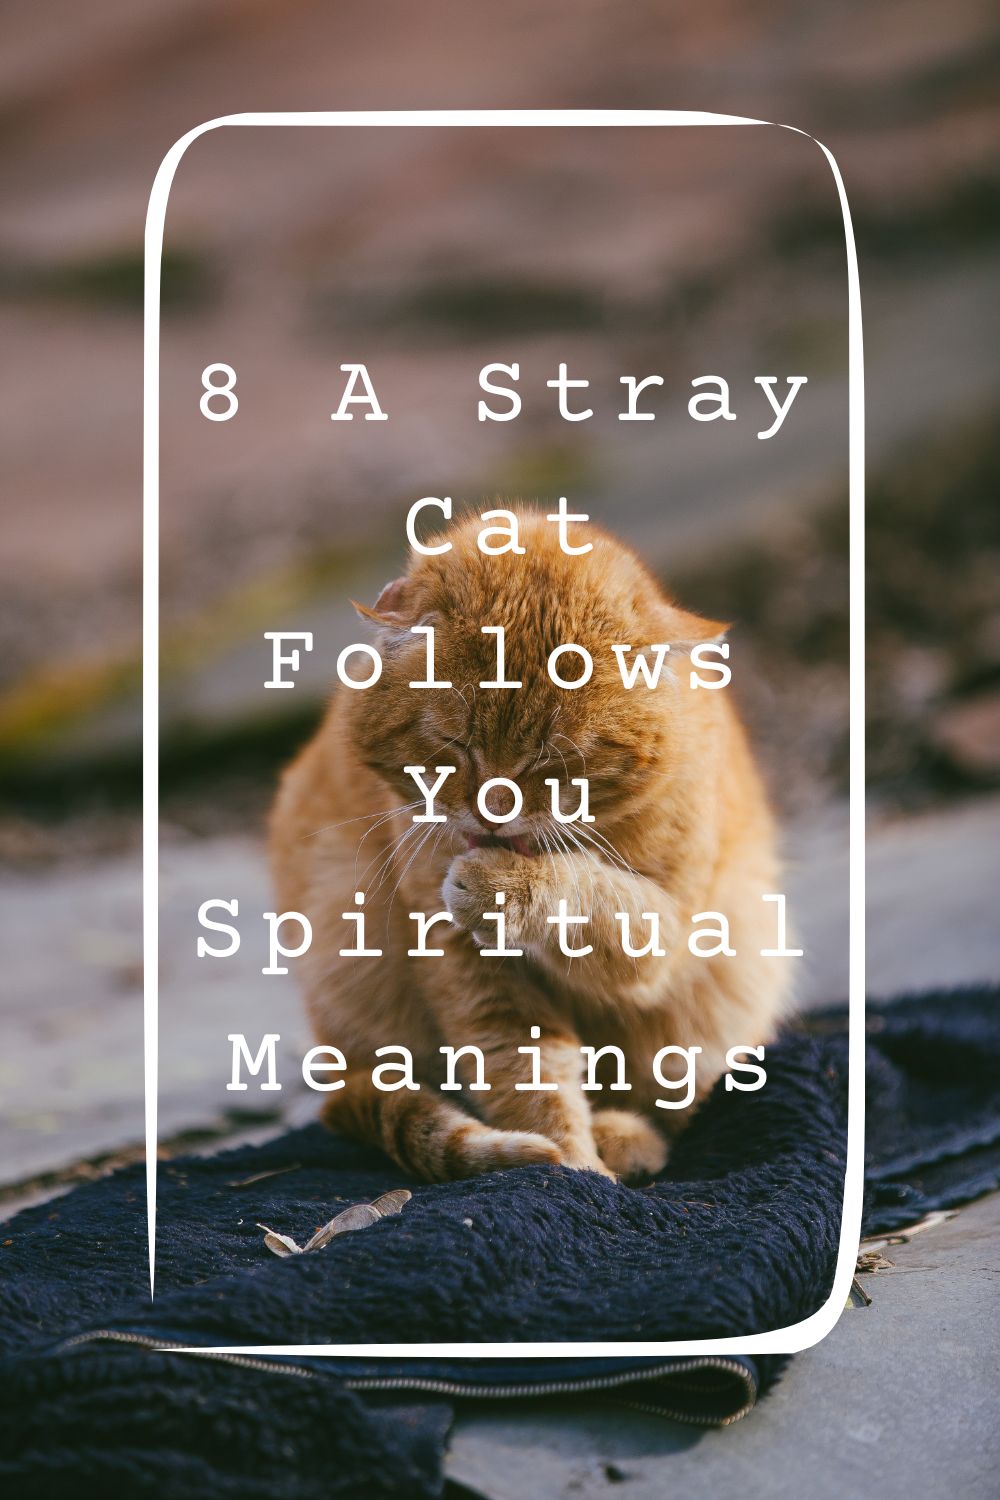 8 A Stray Cat Follows You Spiritual Meanings 4